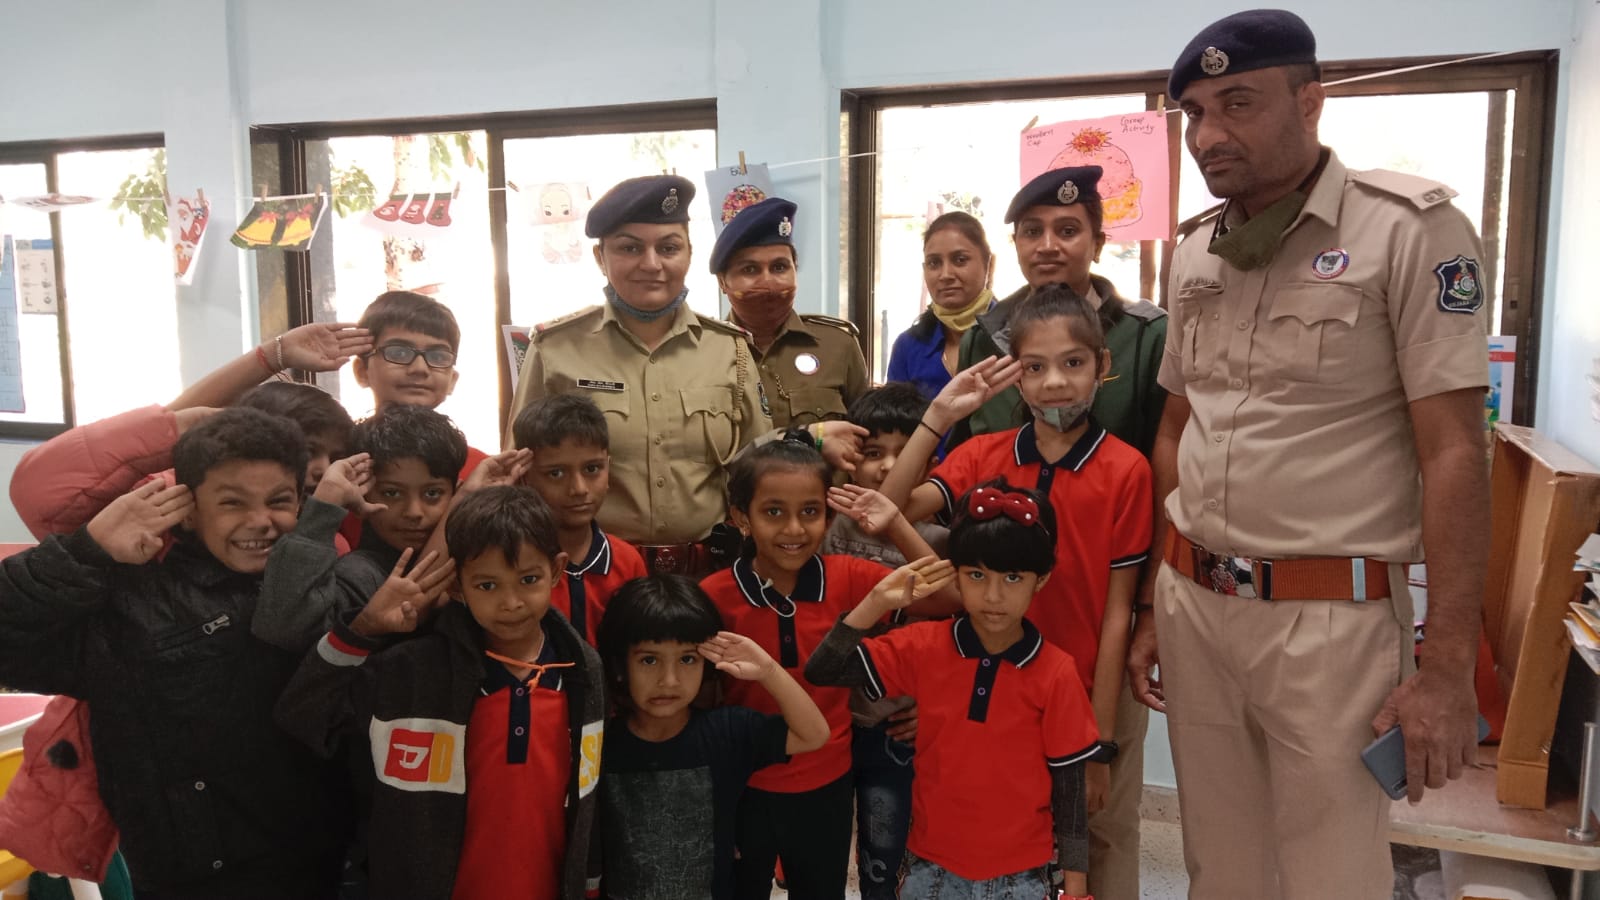 Tara kids were glad  to be visited by the police department of Gandhinagar.